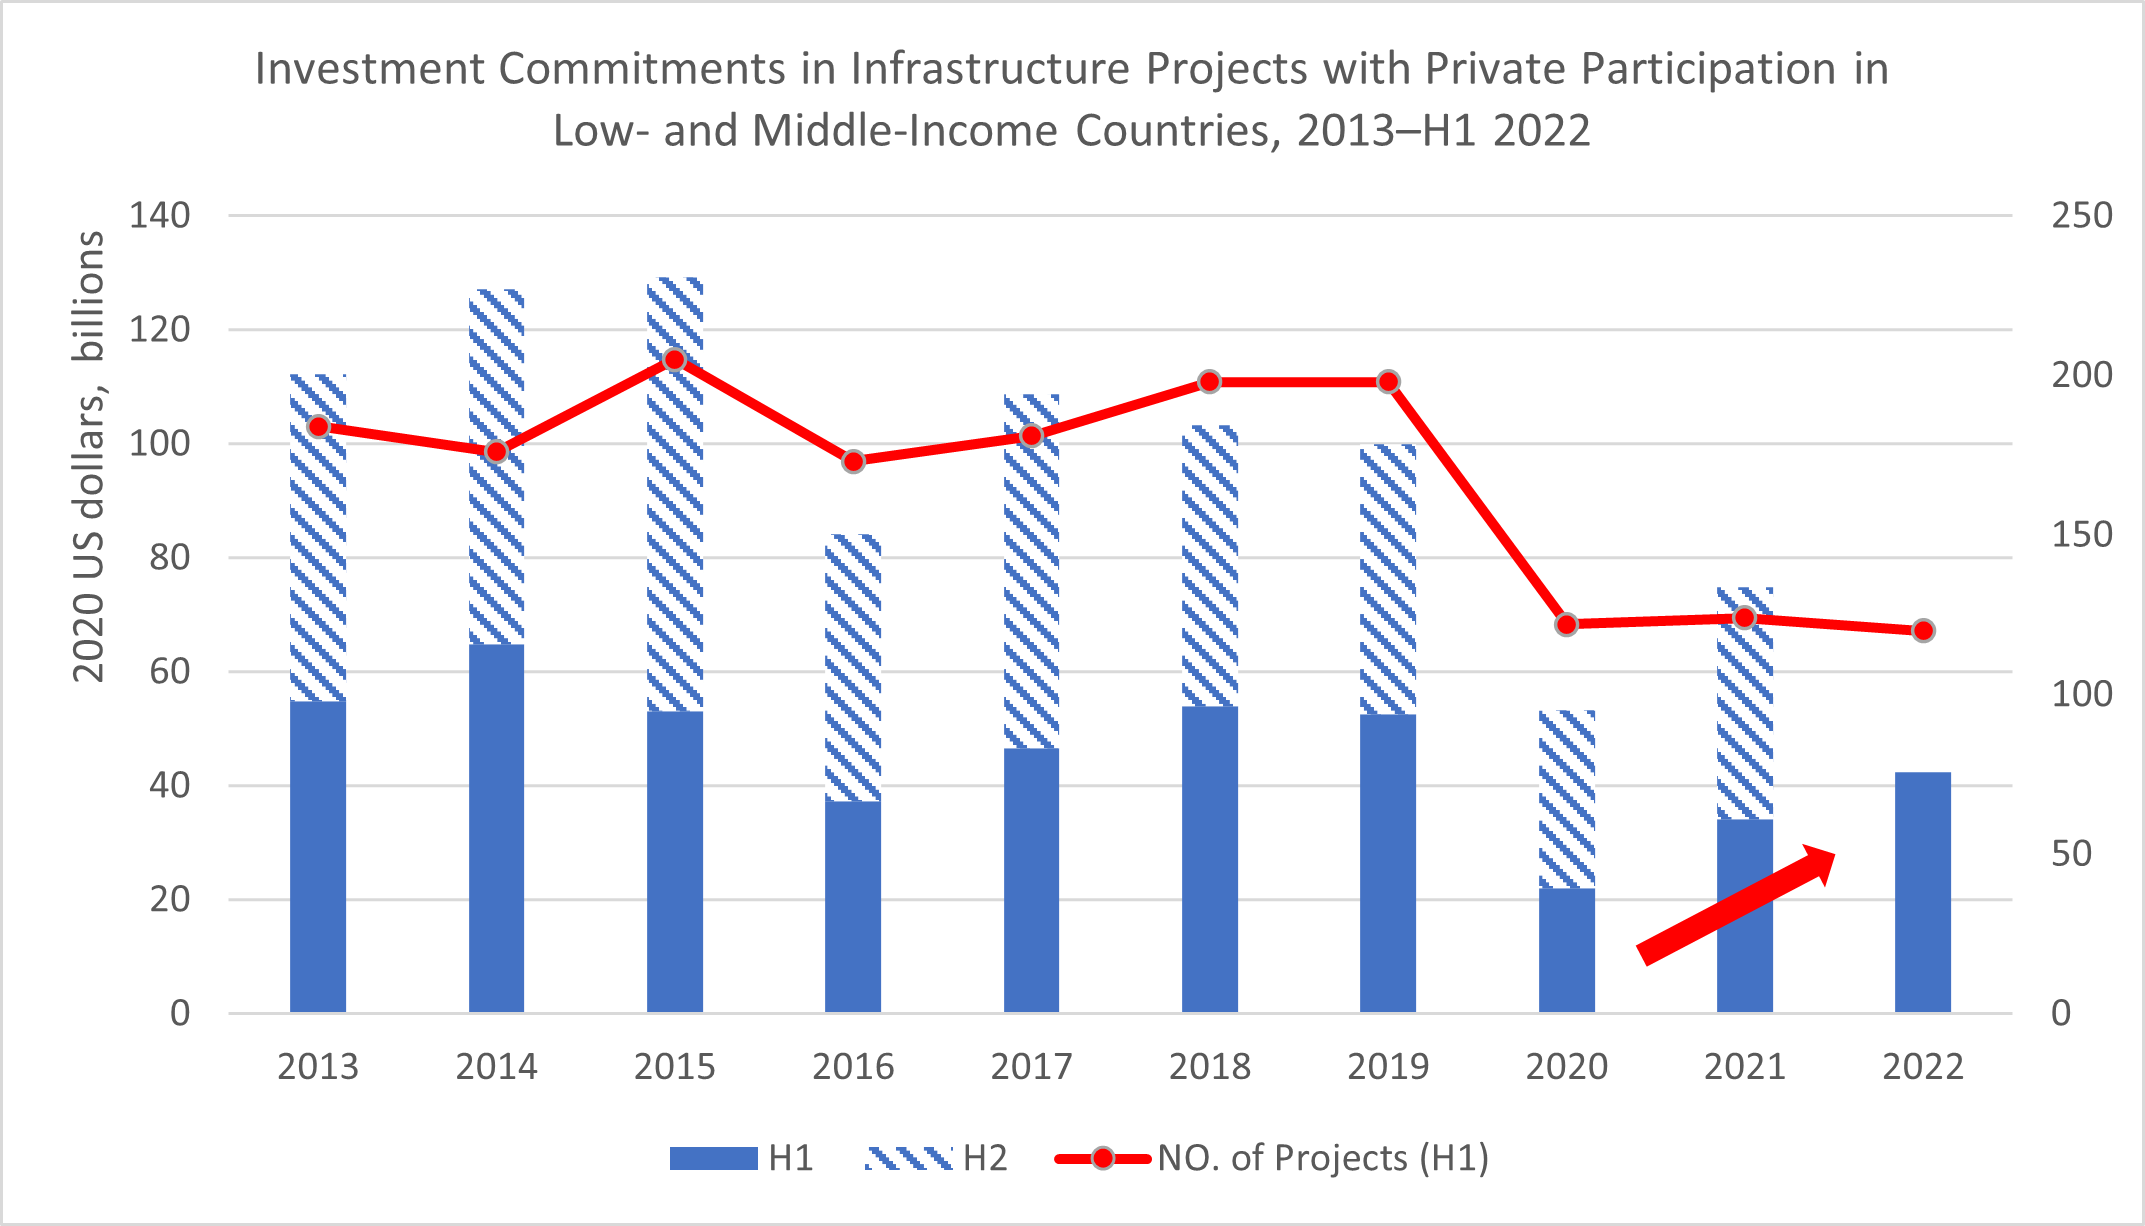 Investment Commitments in Infrastructure Projects with Private Participation in Low- and Middle-Income Countries from 2013 to 2022